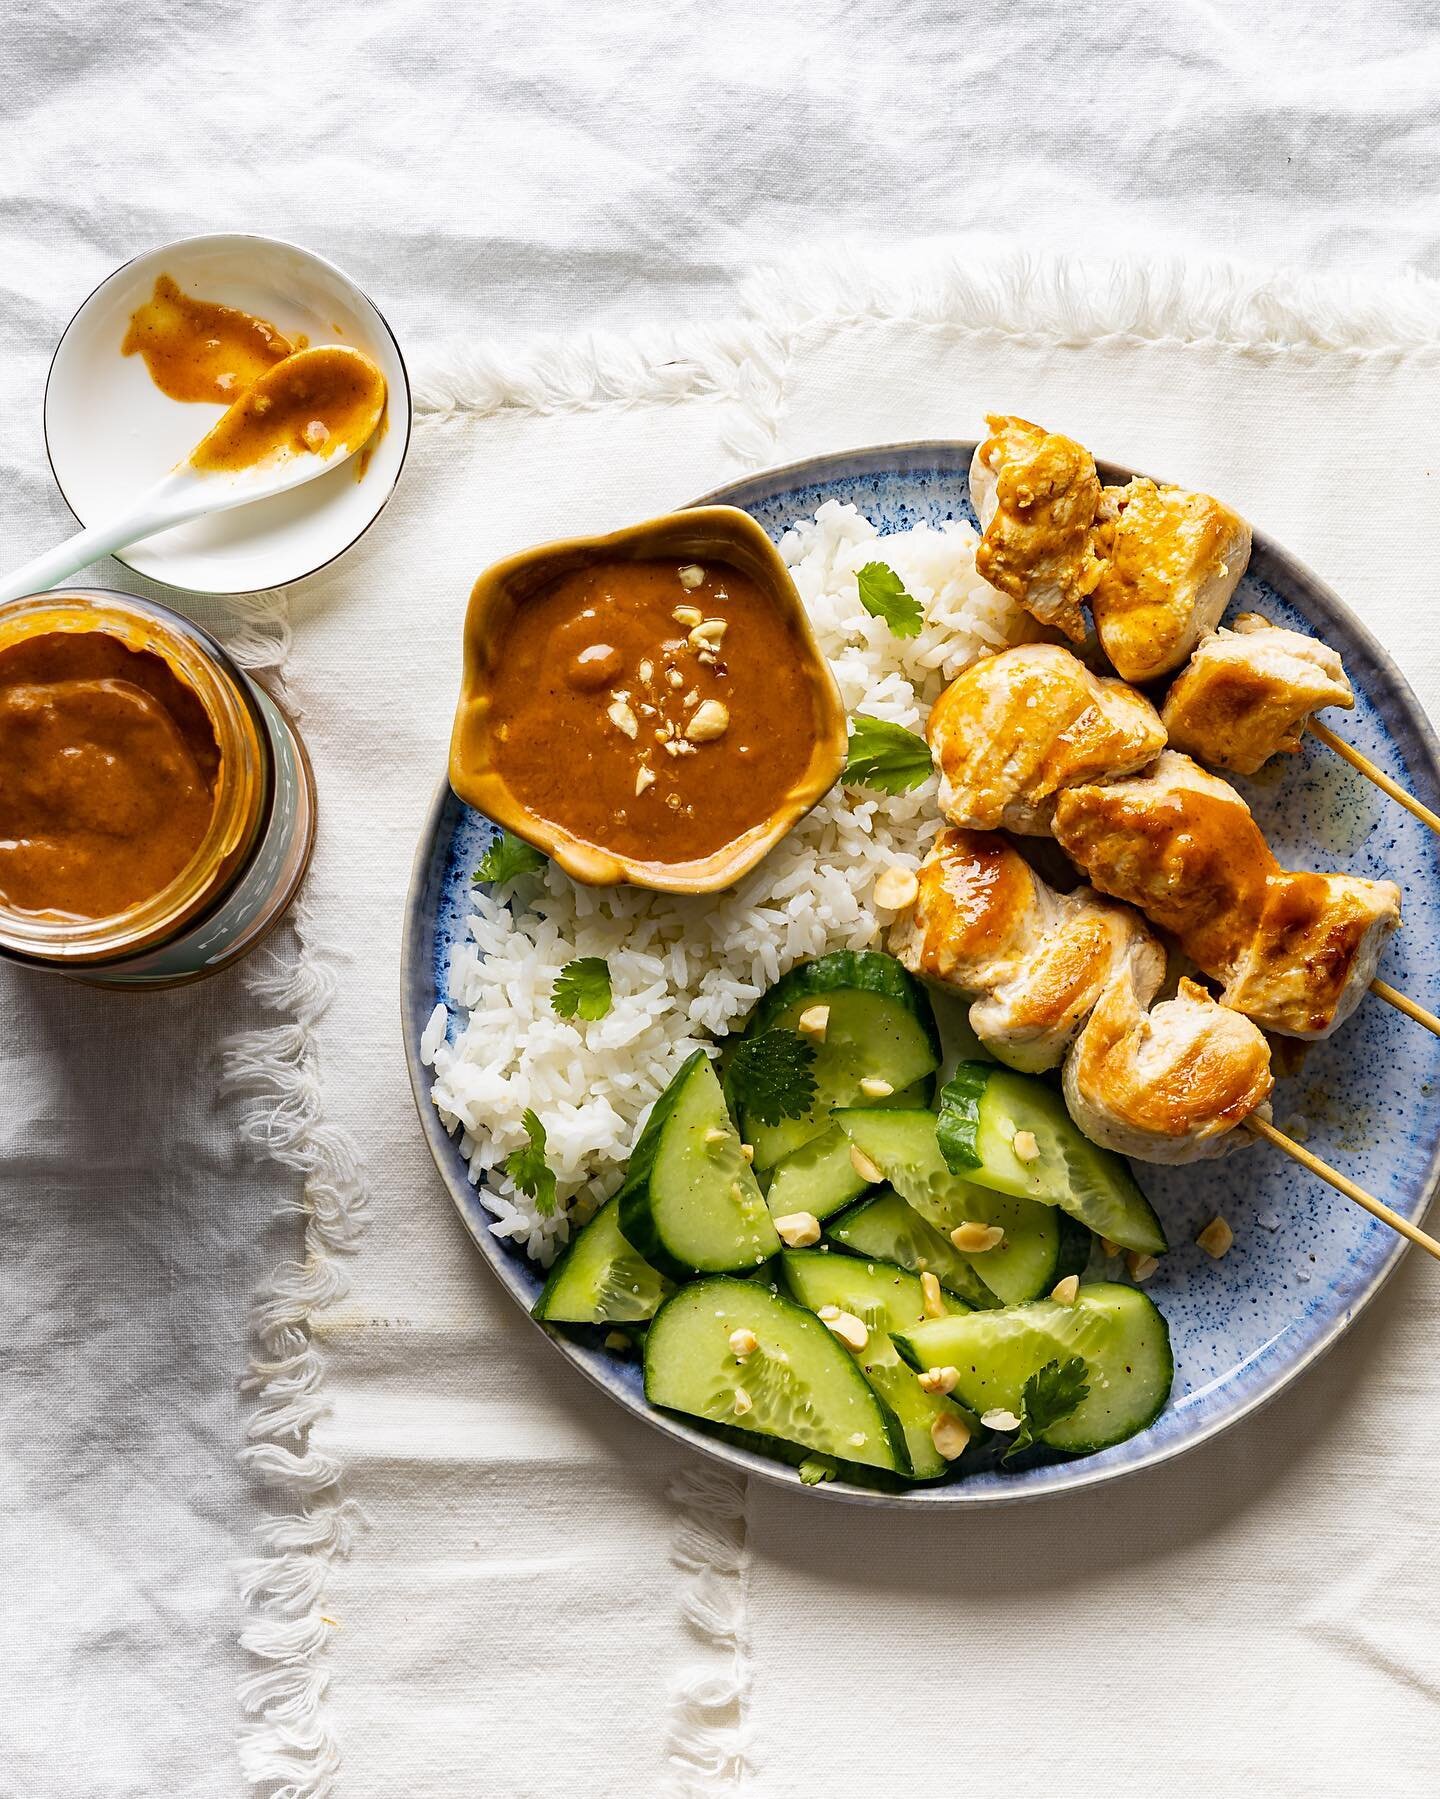 Grilled Chicken Skewers served with our jars of Artisan Massaman Curry Sauce👌🏻🌿

Available on our website https://www.kindeum.com/products/artisan-massaman-curry-sauce
.
.
.
.
.
#architecture #art #artisan #plants #skewers #healthyeating #thairest